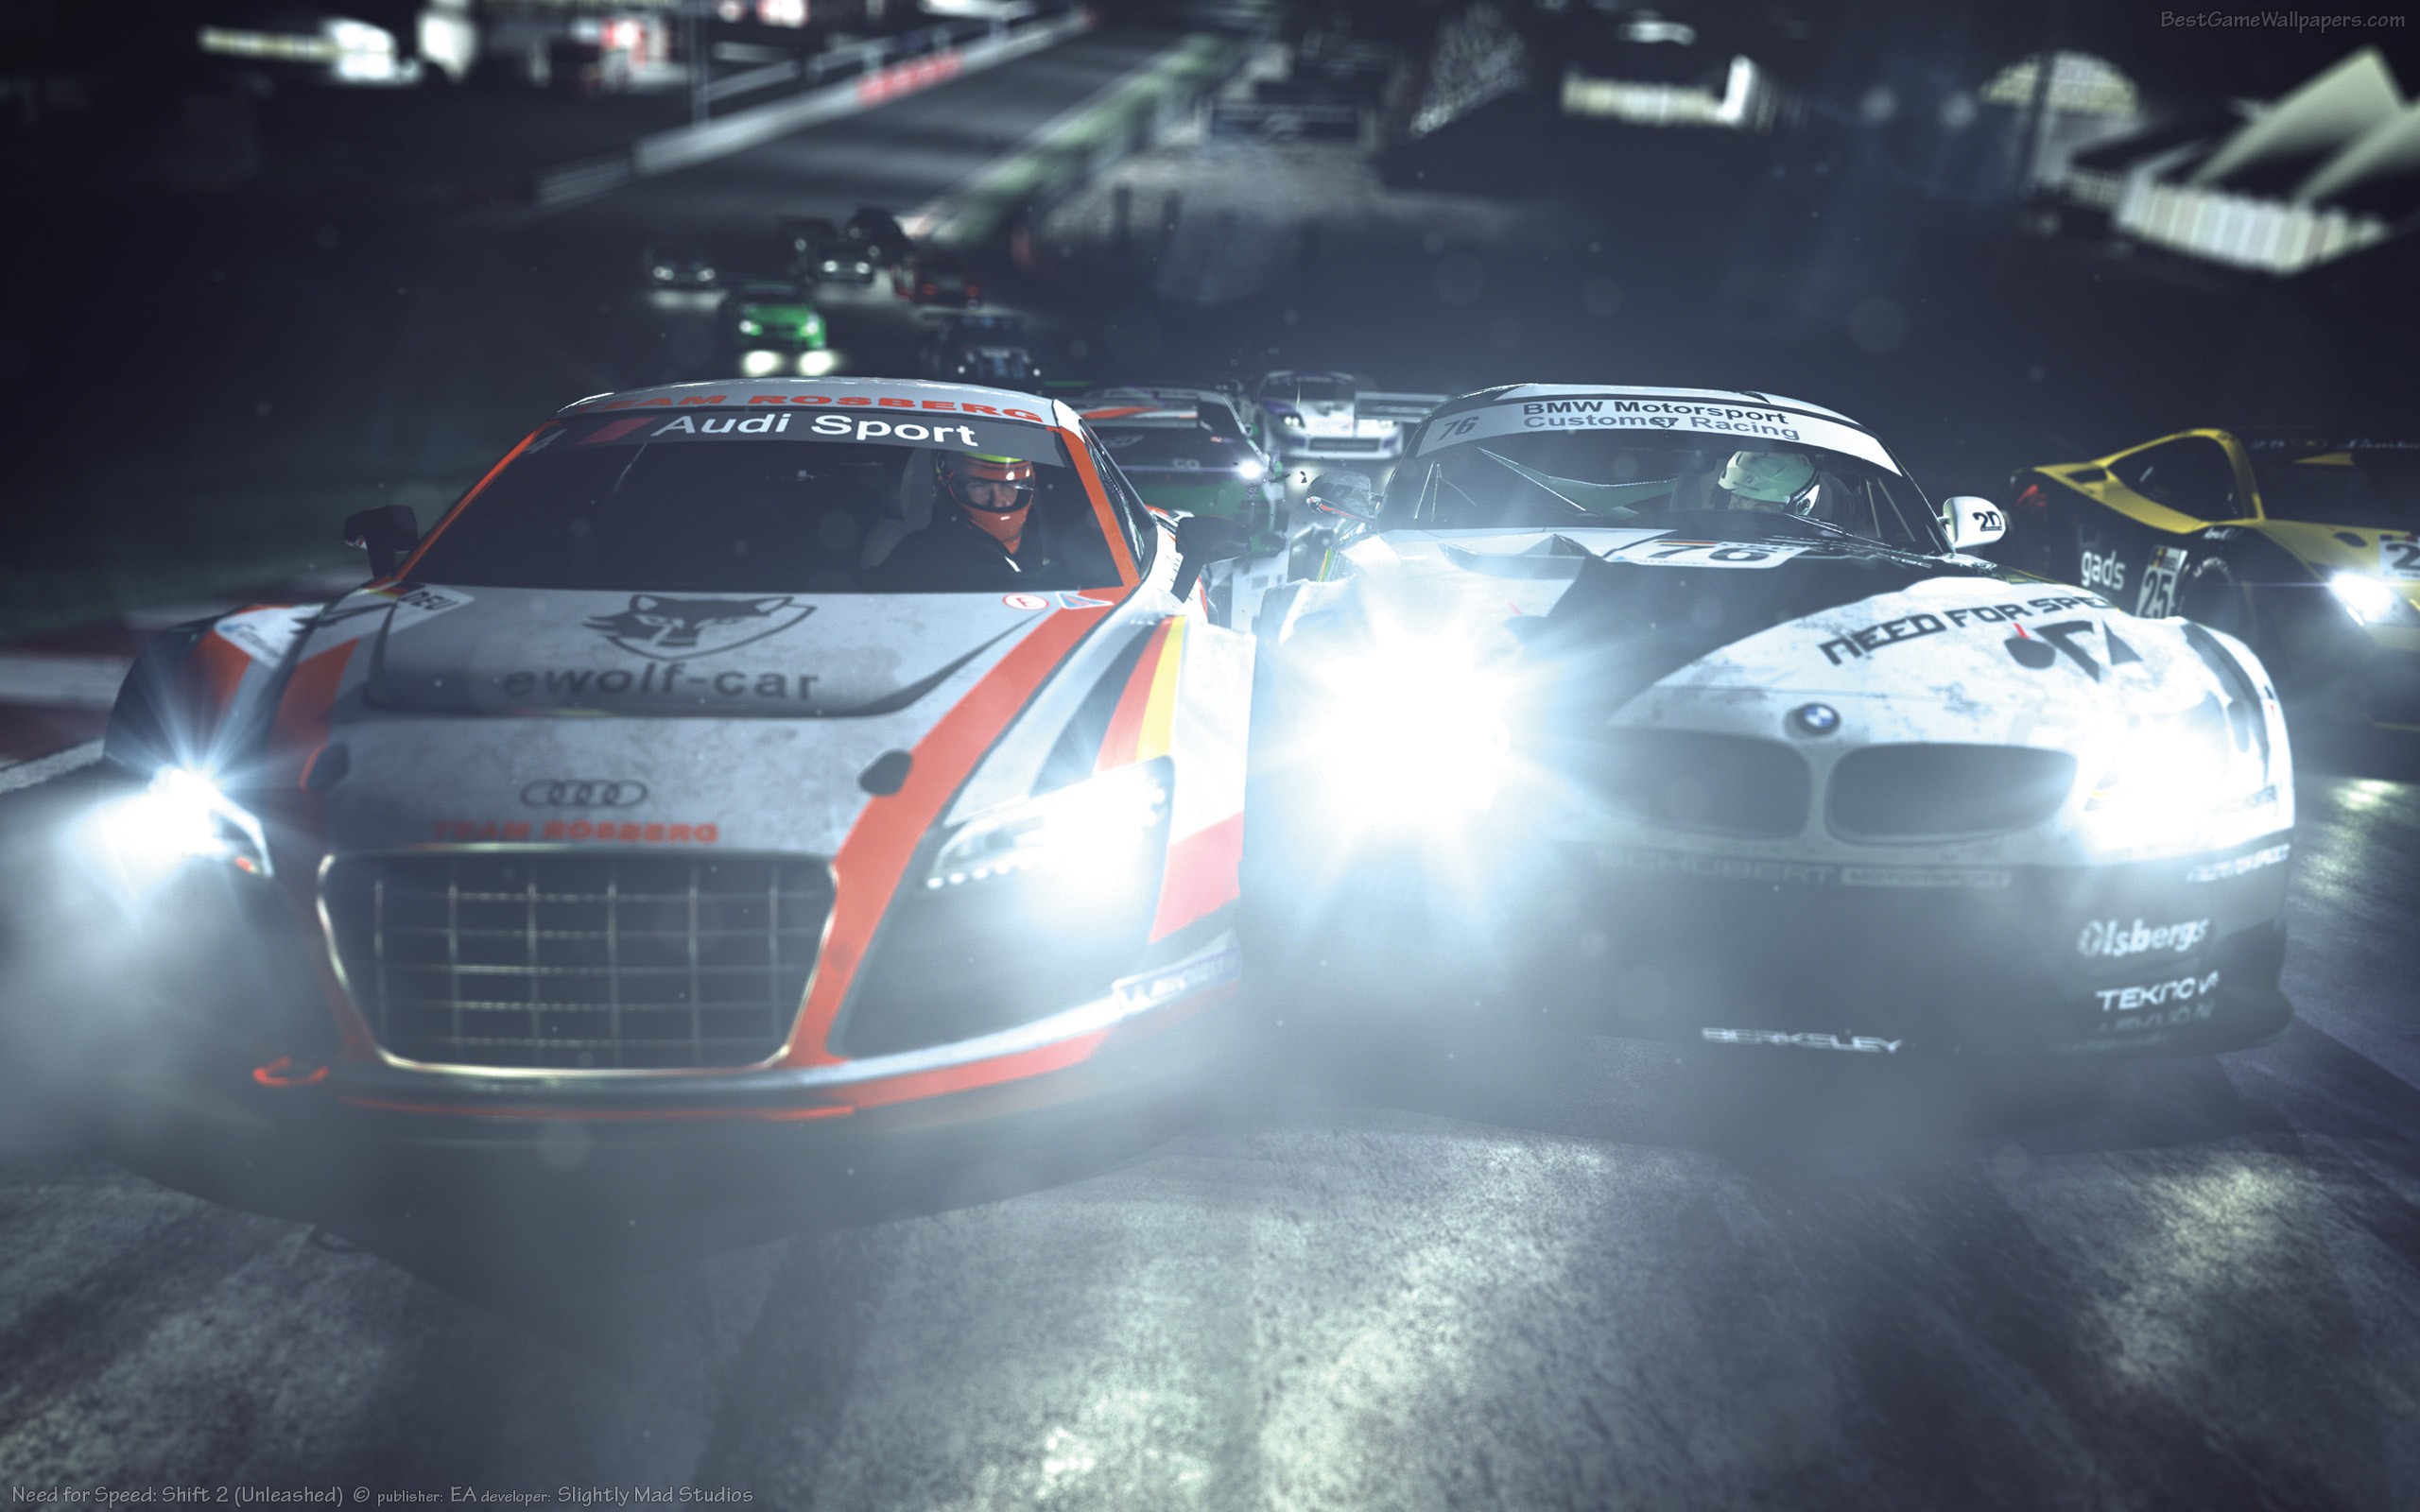 Need For Speed Shift Free Download for PC